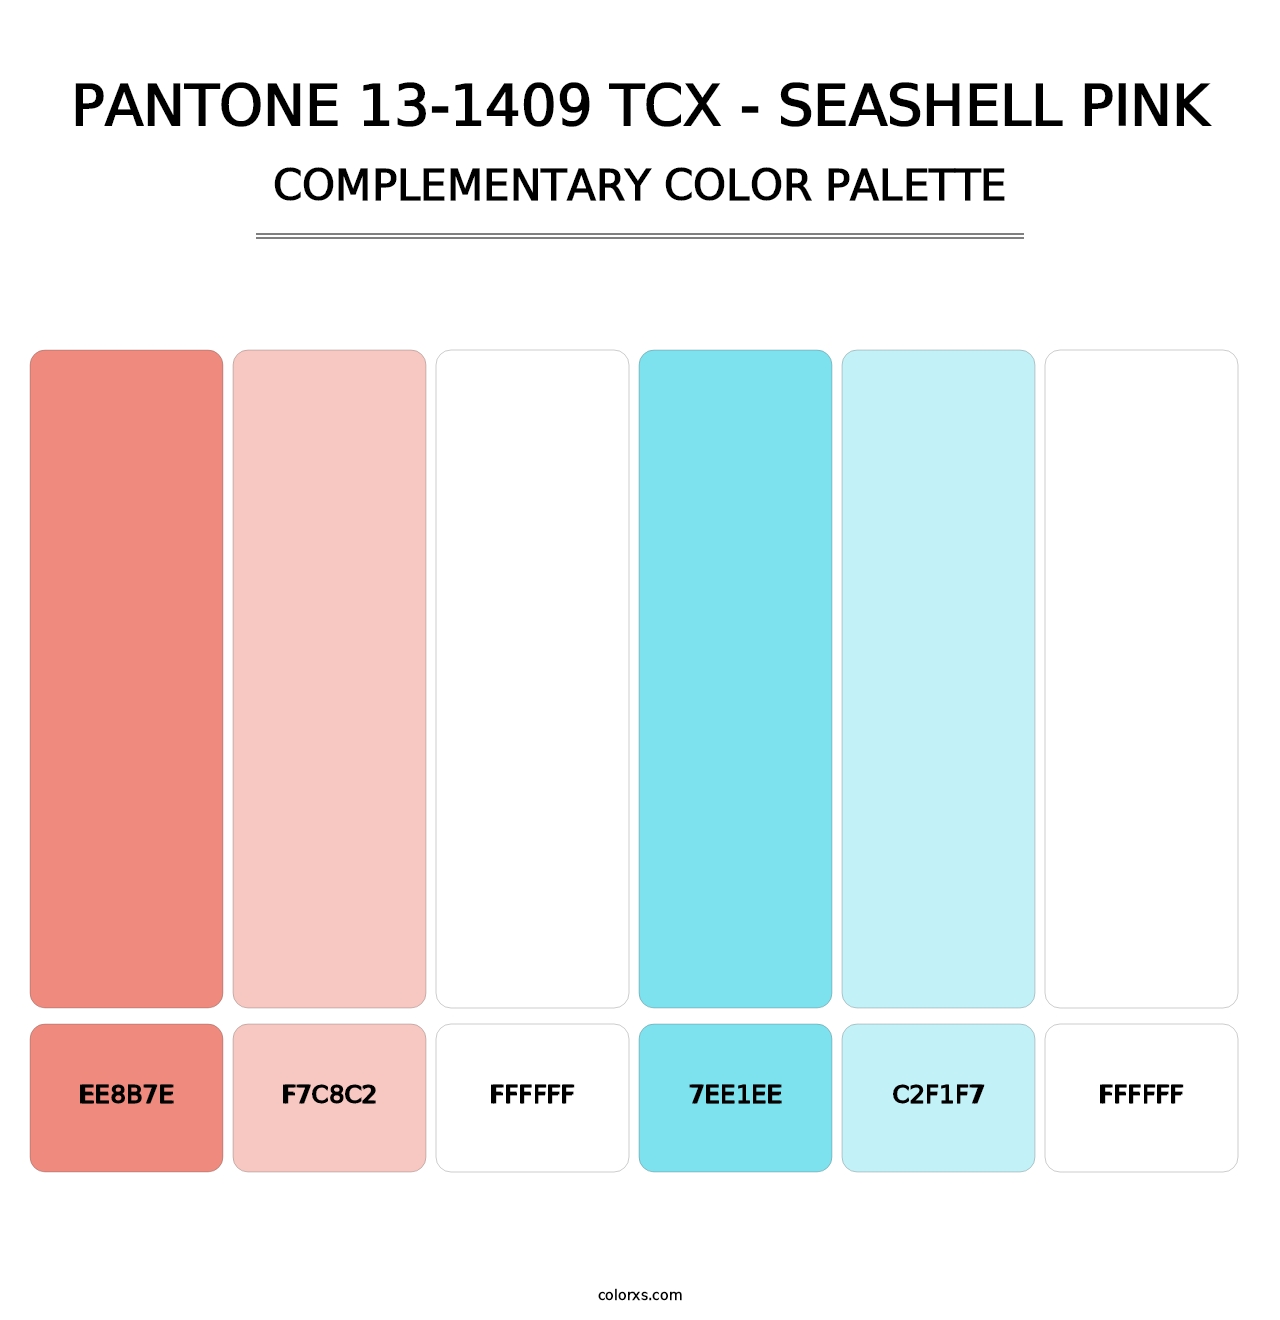 PANTONE 13-1409 TCX - Seashell Pink - Complementary Color Palette